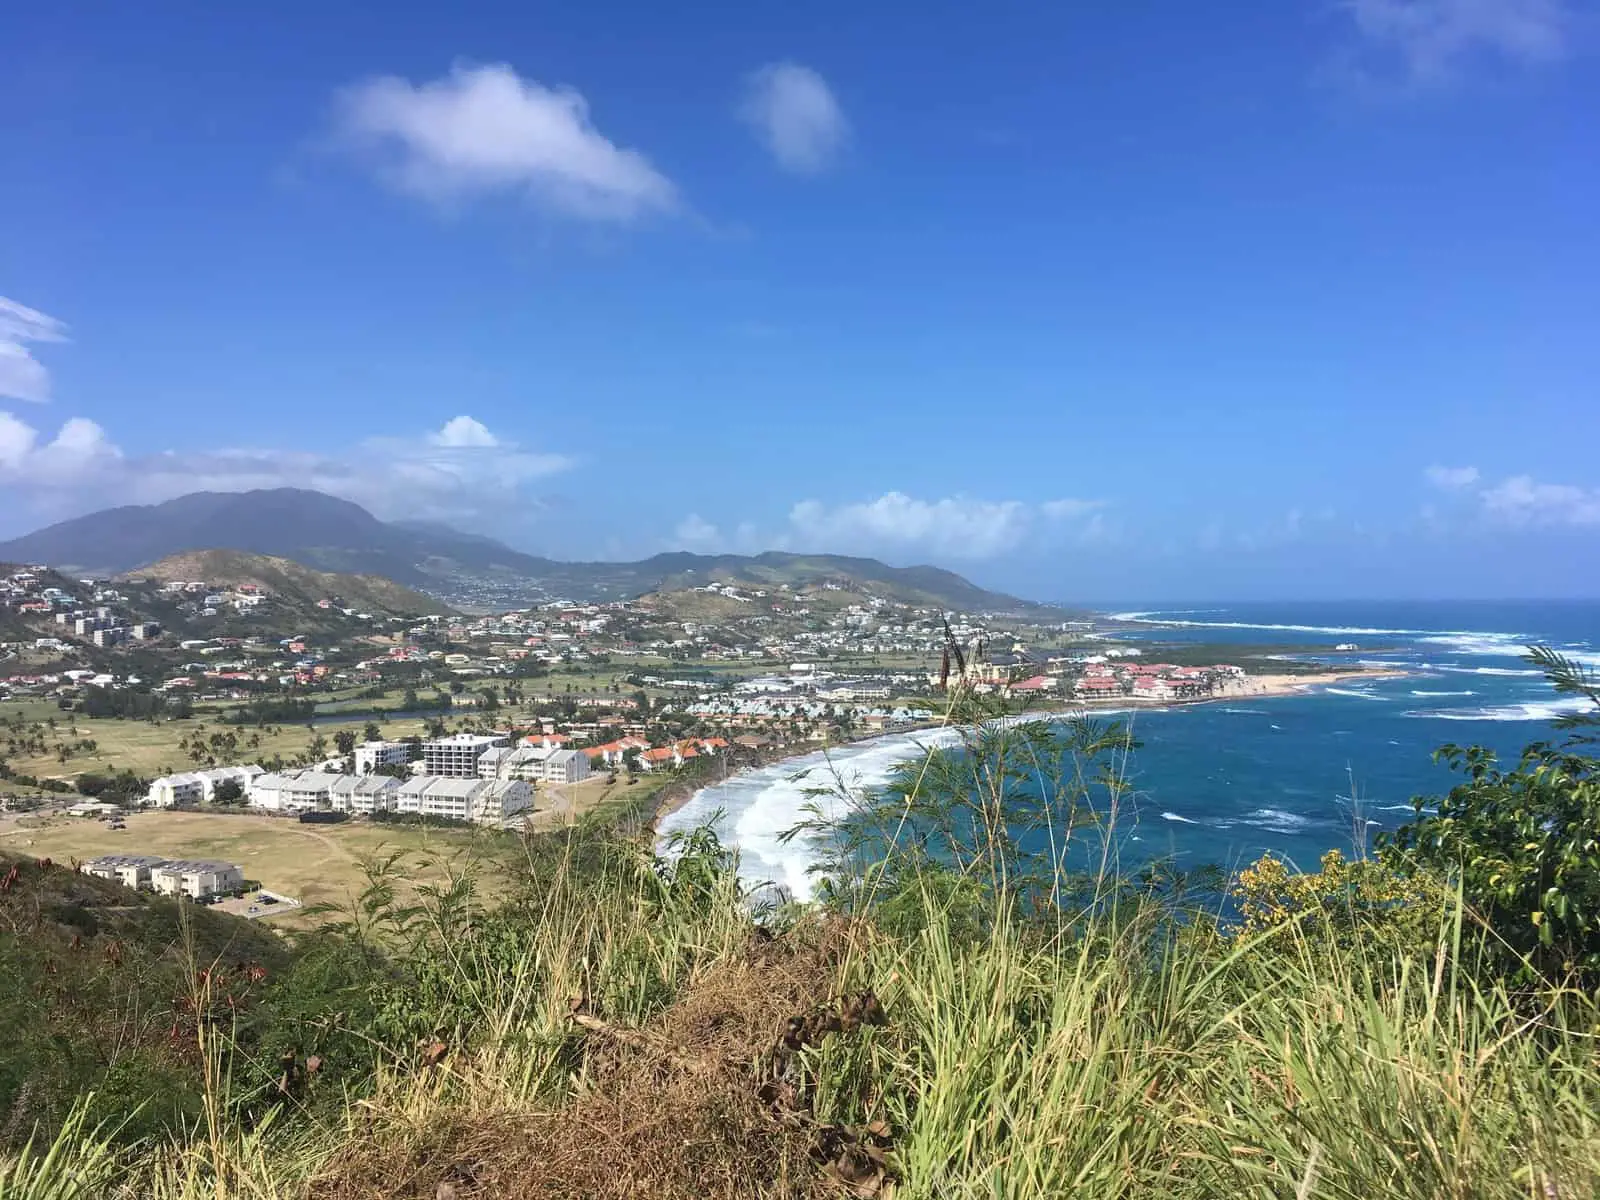 St Kitts in the Caribbean